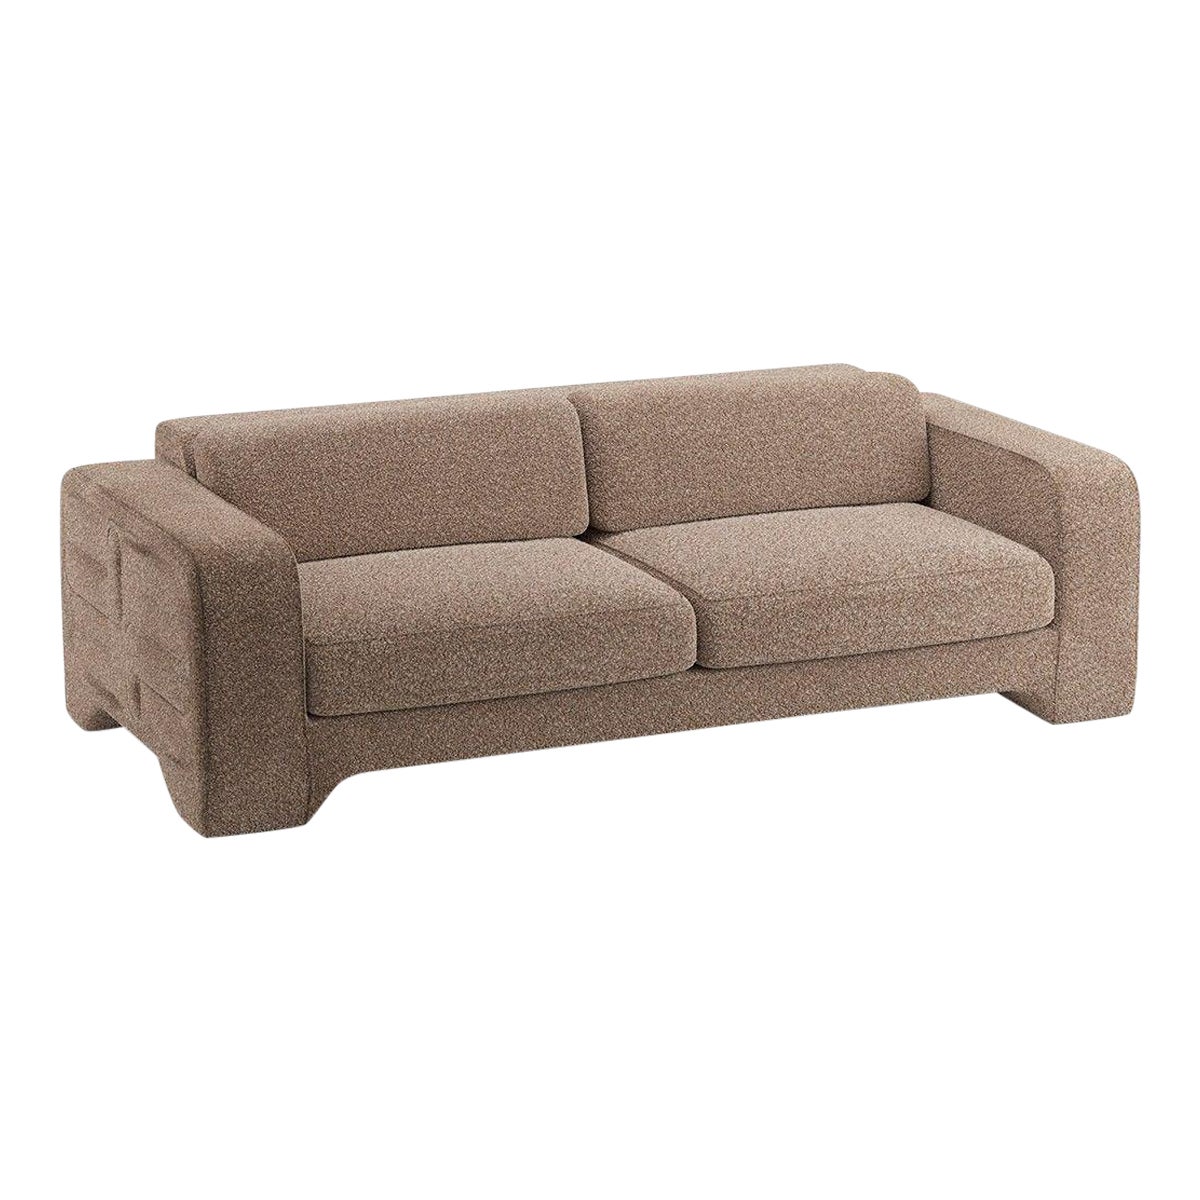 Popus Editions Giovanna 4 Seater Sofa in Ciotello Athena Loop Yarn Upholstery For Sale